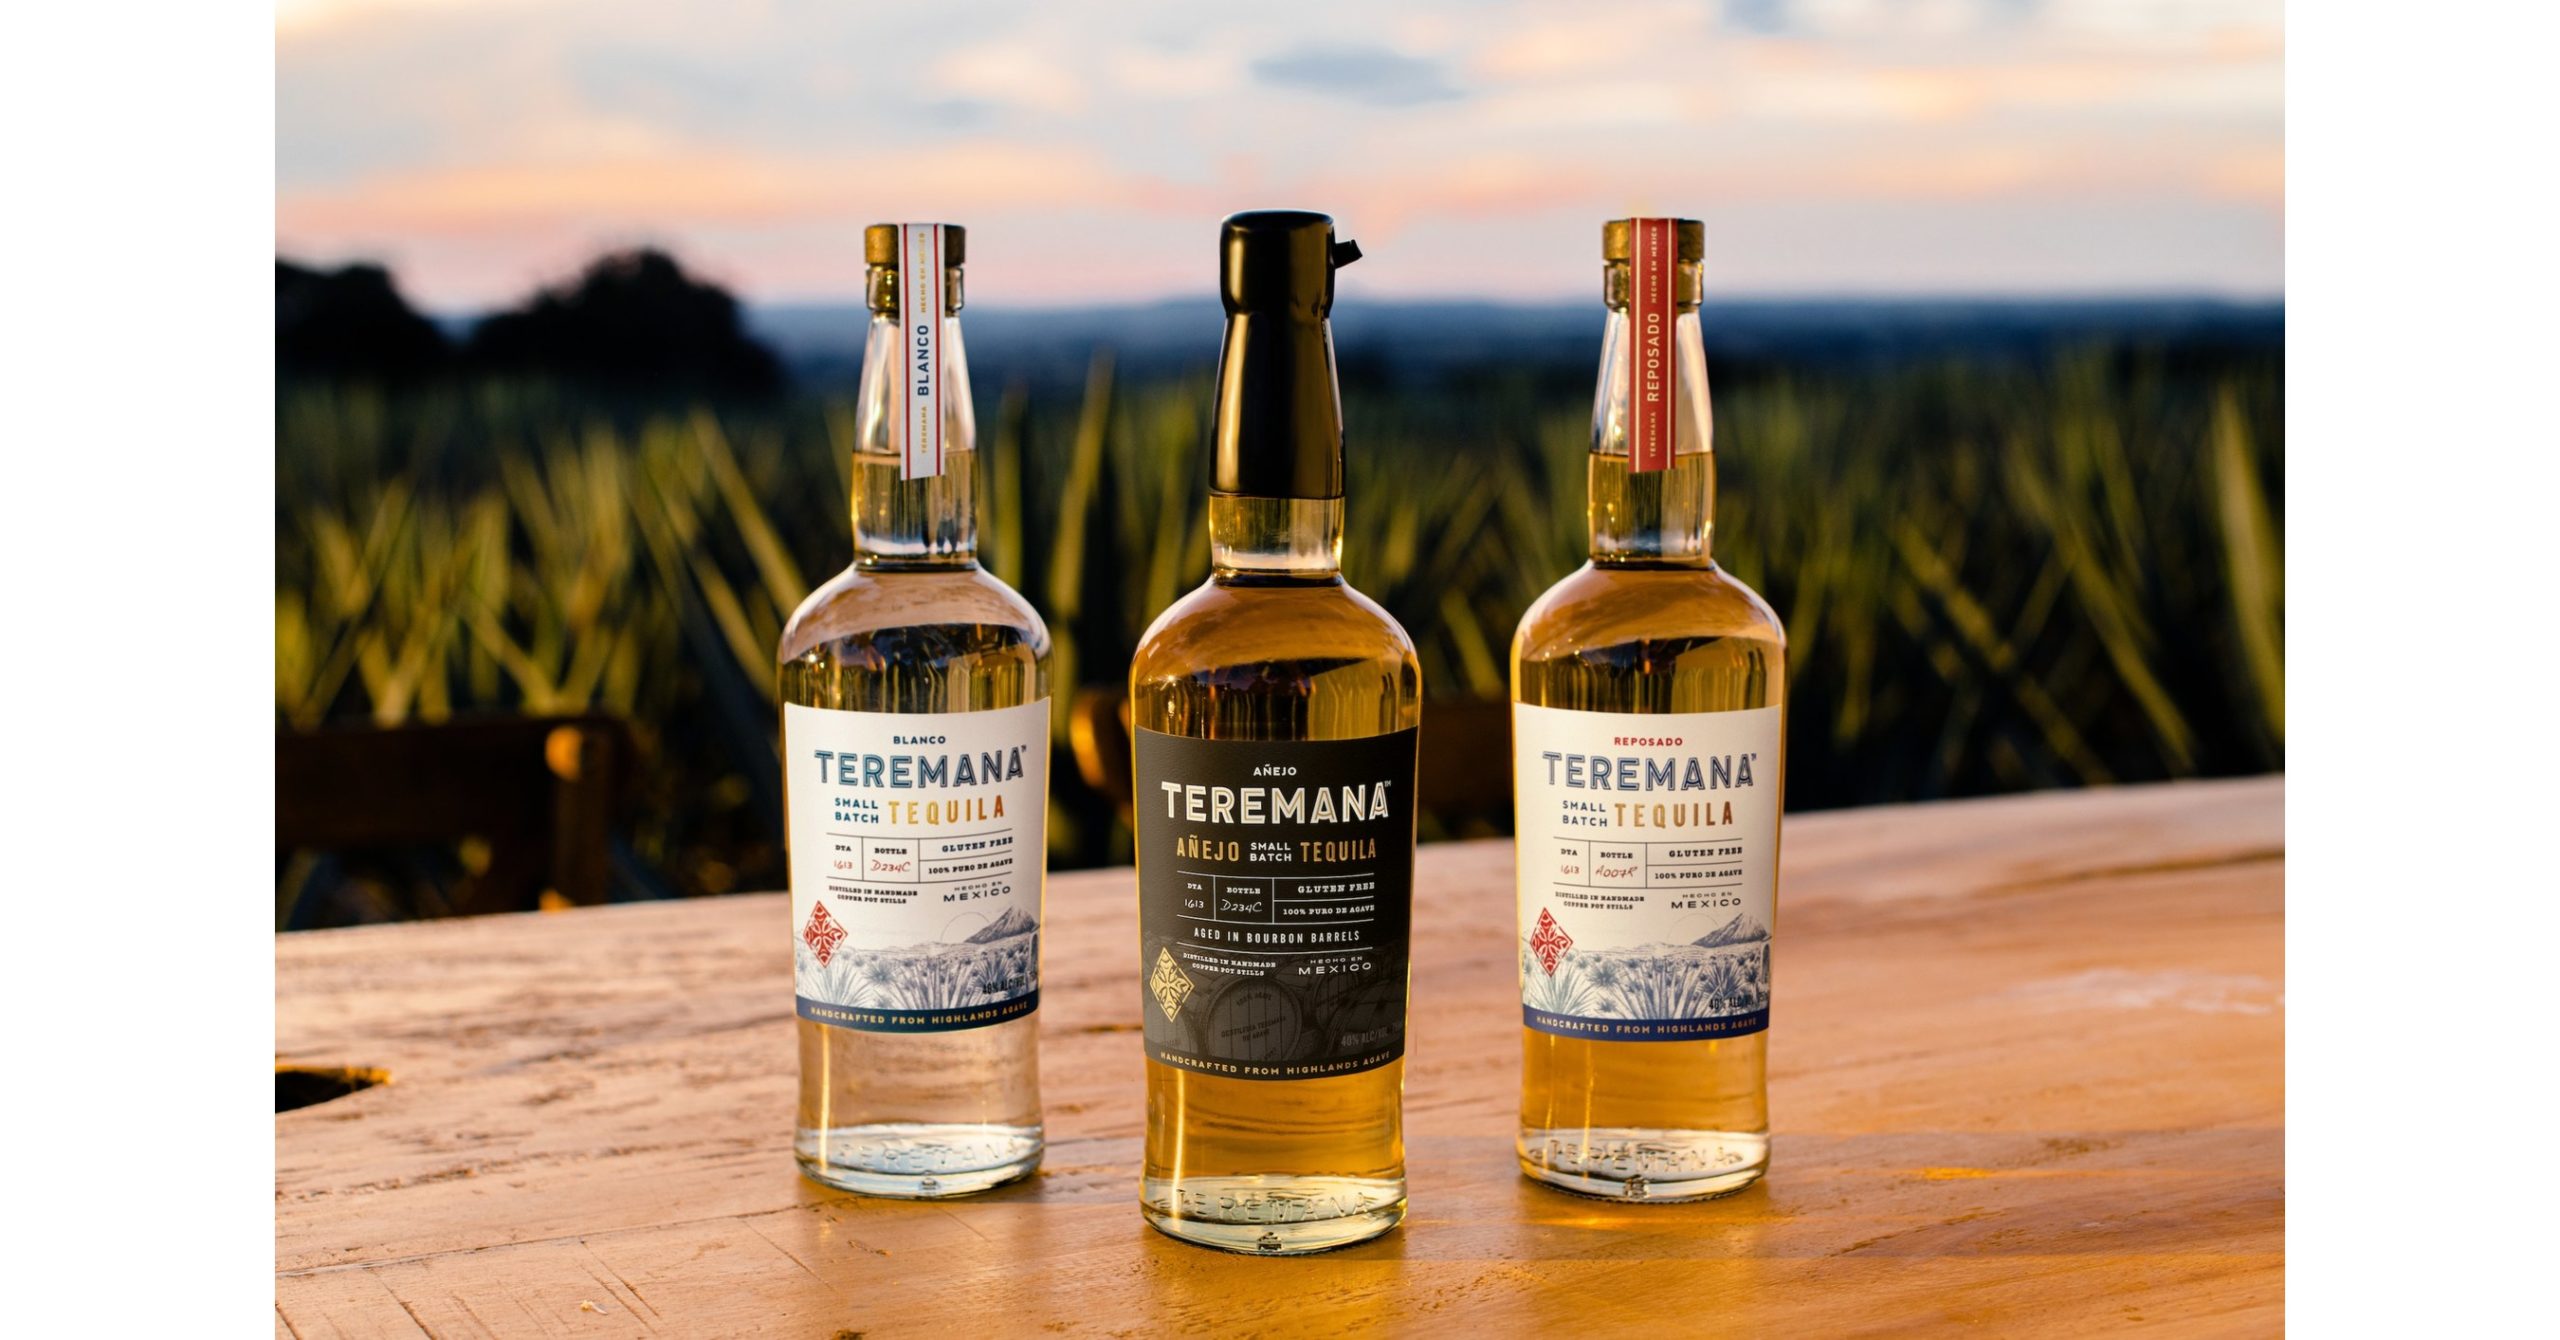 The new Teremana Añejo is made using a slow, handcrafted process and is aged in American Whiskey Barrels. (PRNewsfoto/Teremana Tequila)